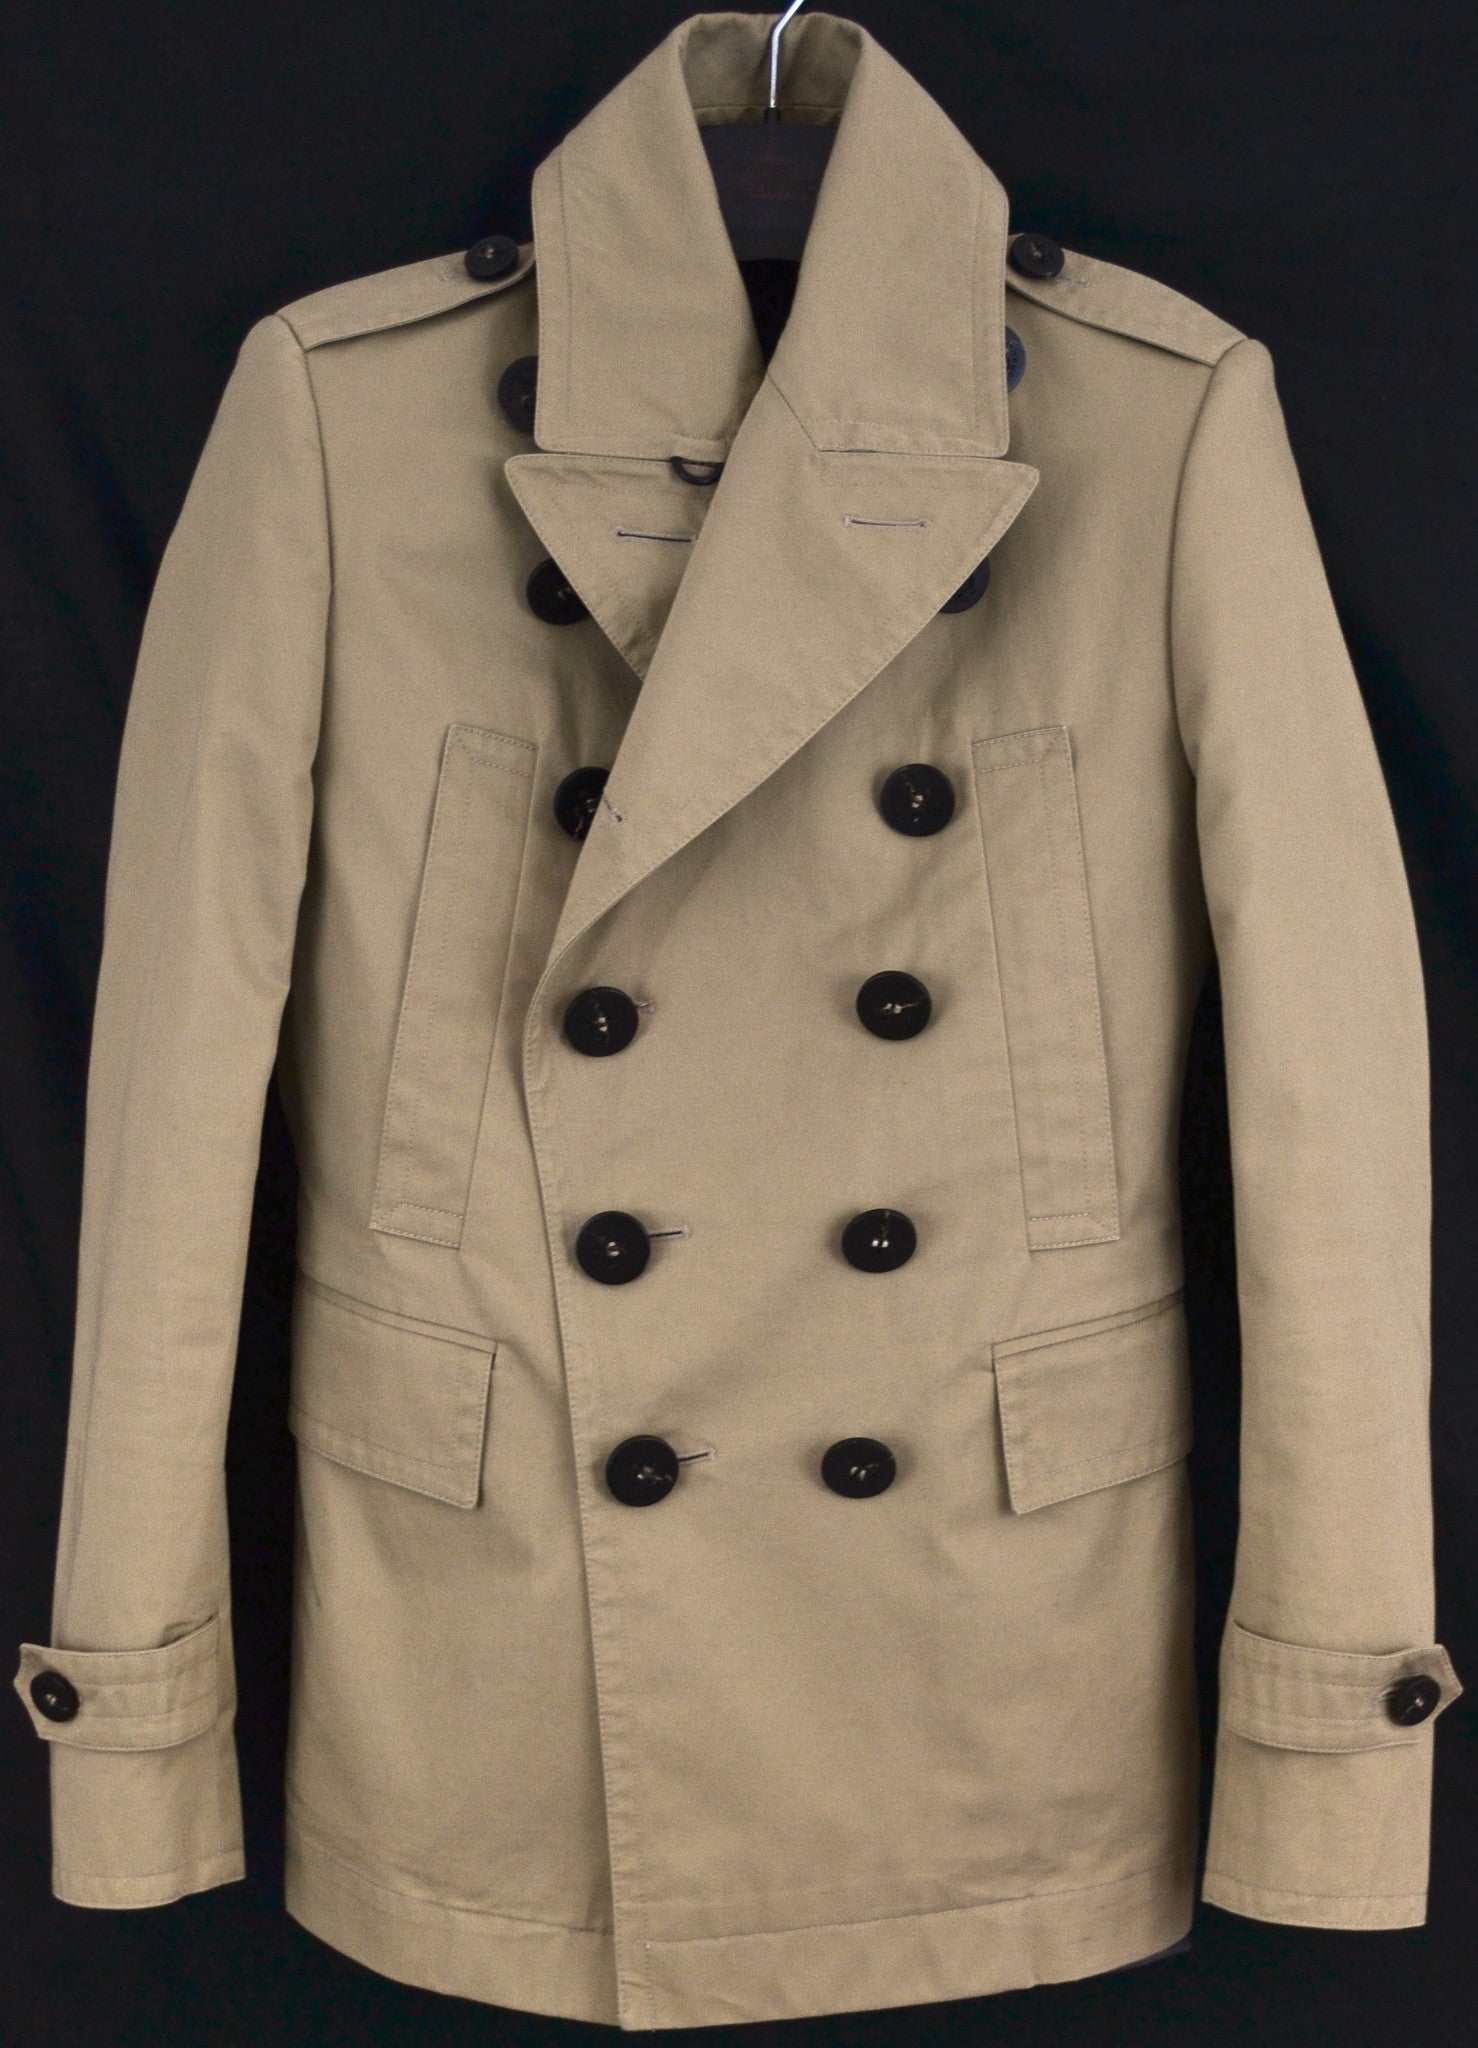 Burberry Prorsum 2011 Cotton Twill Military Peacoat with Metal Details ...